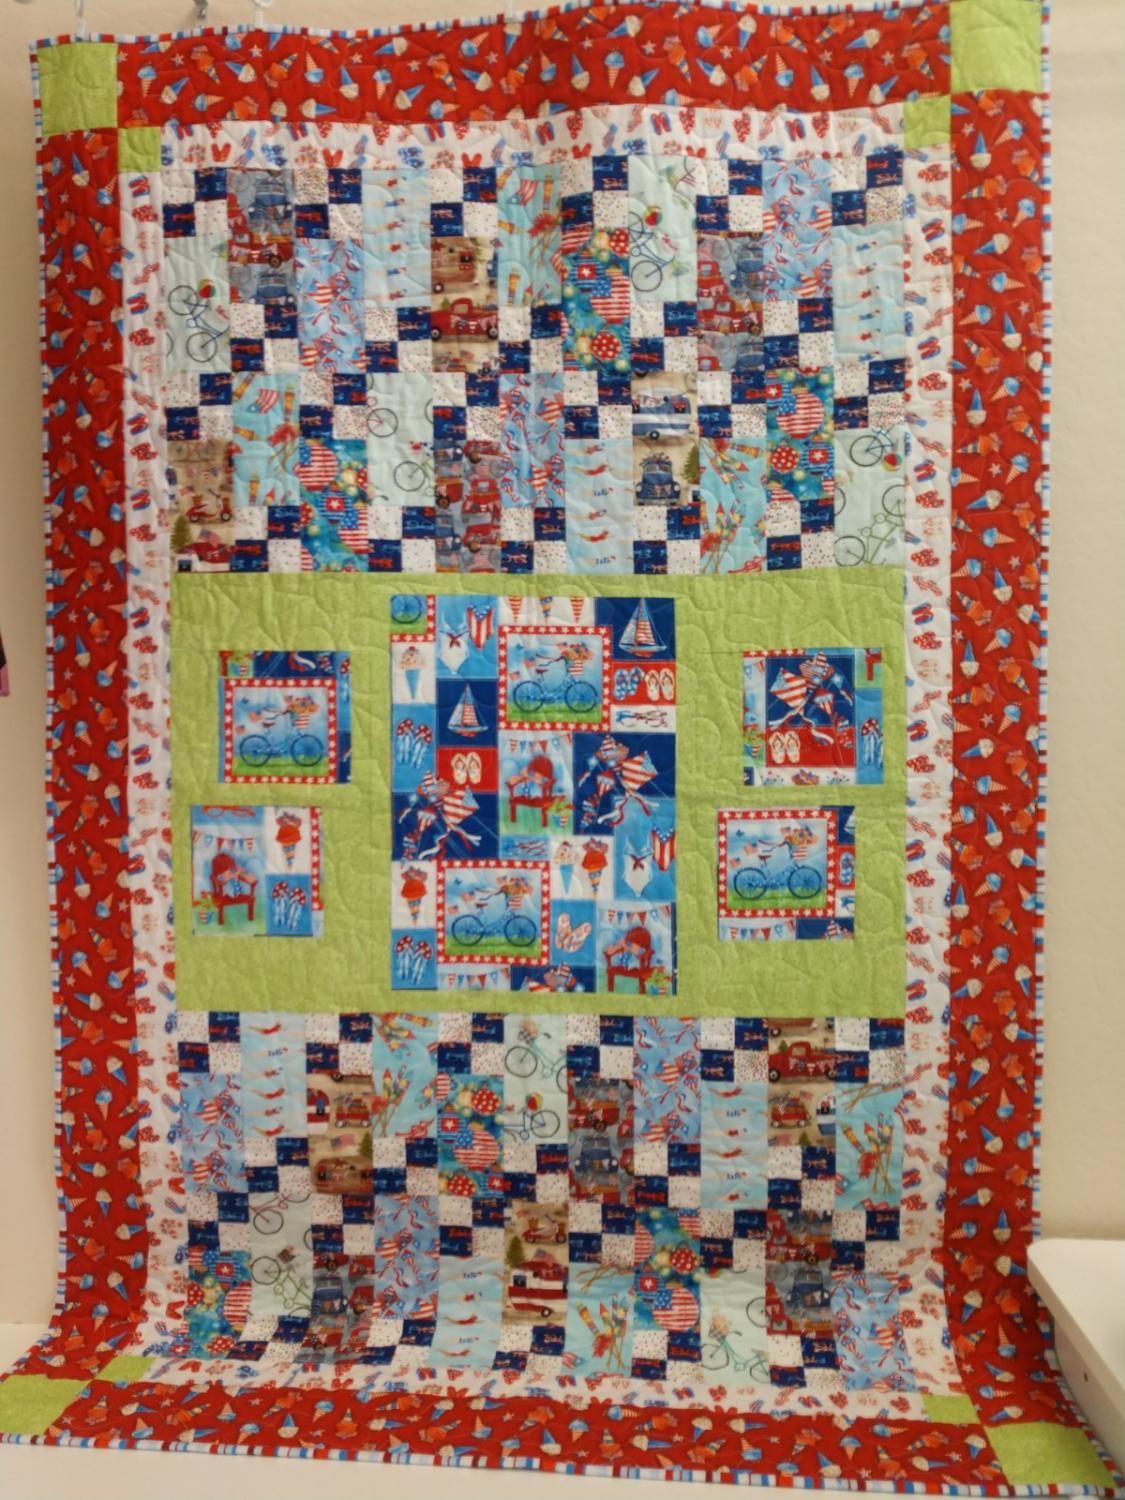 Enjoy this whimsical quilt at your next summer picnic! Measures 45